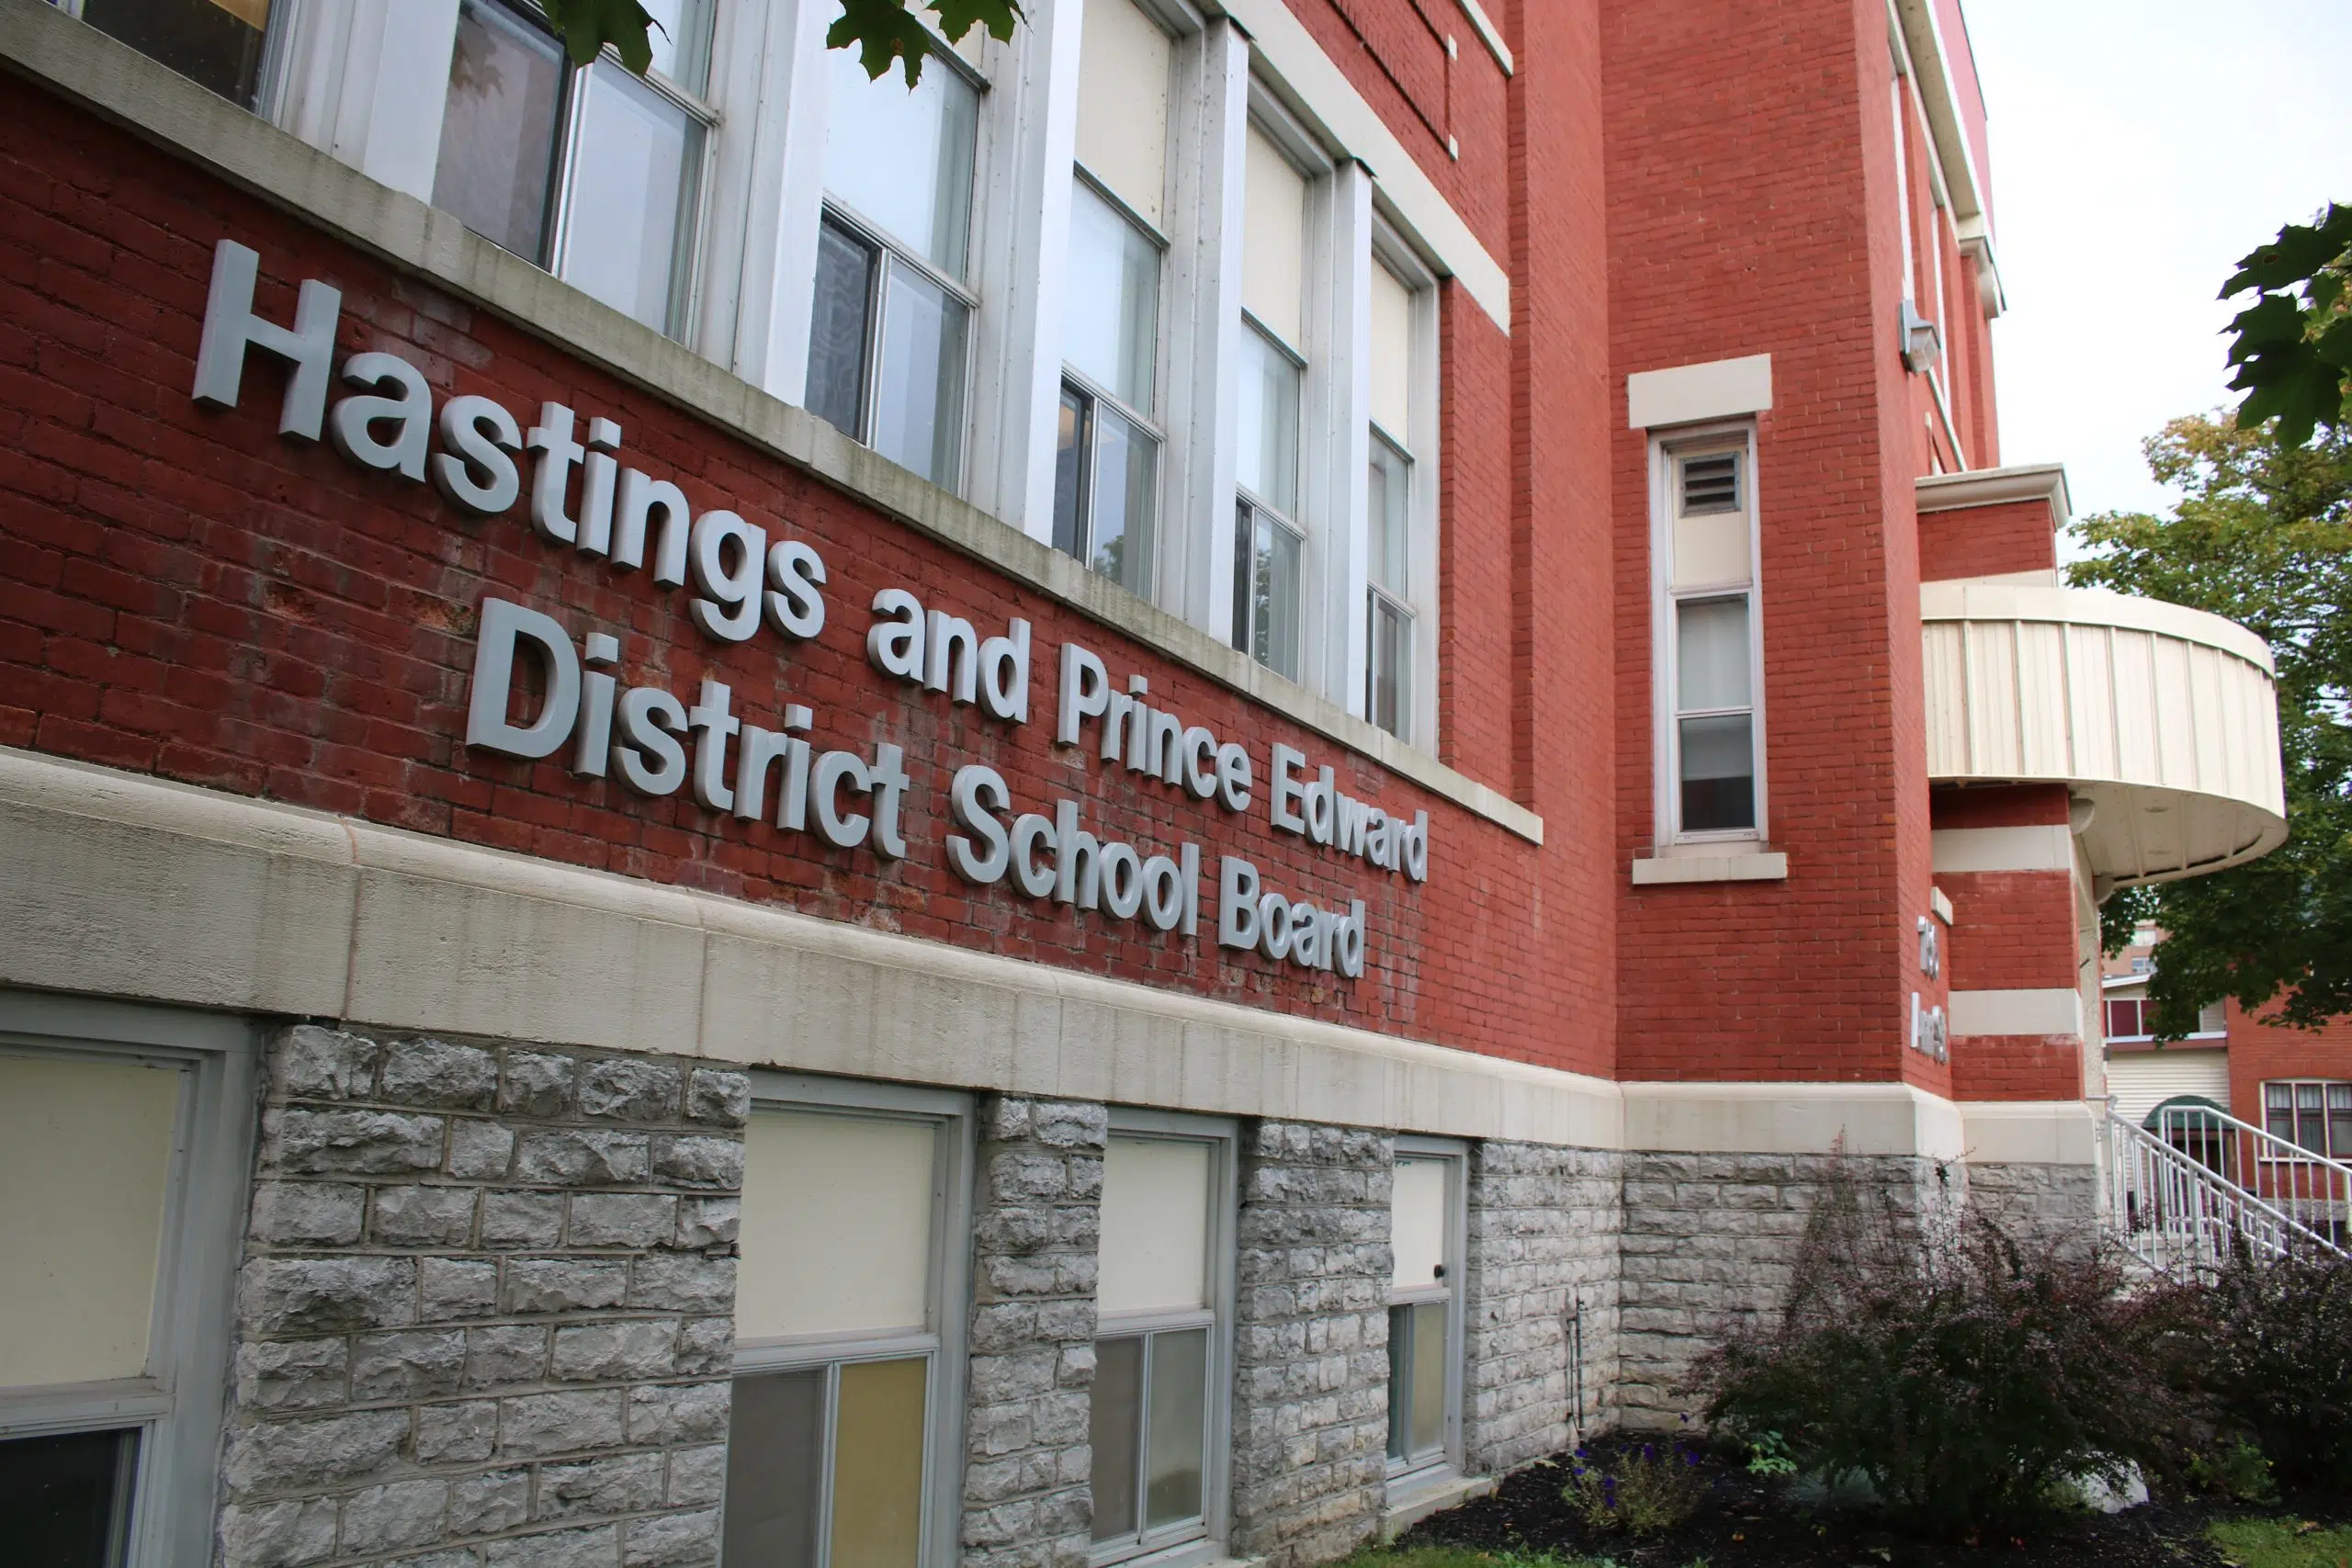 HPEDSB: Looking back on 2020